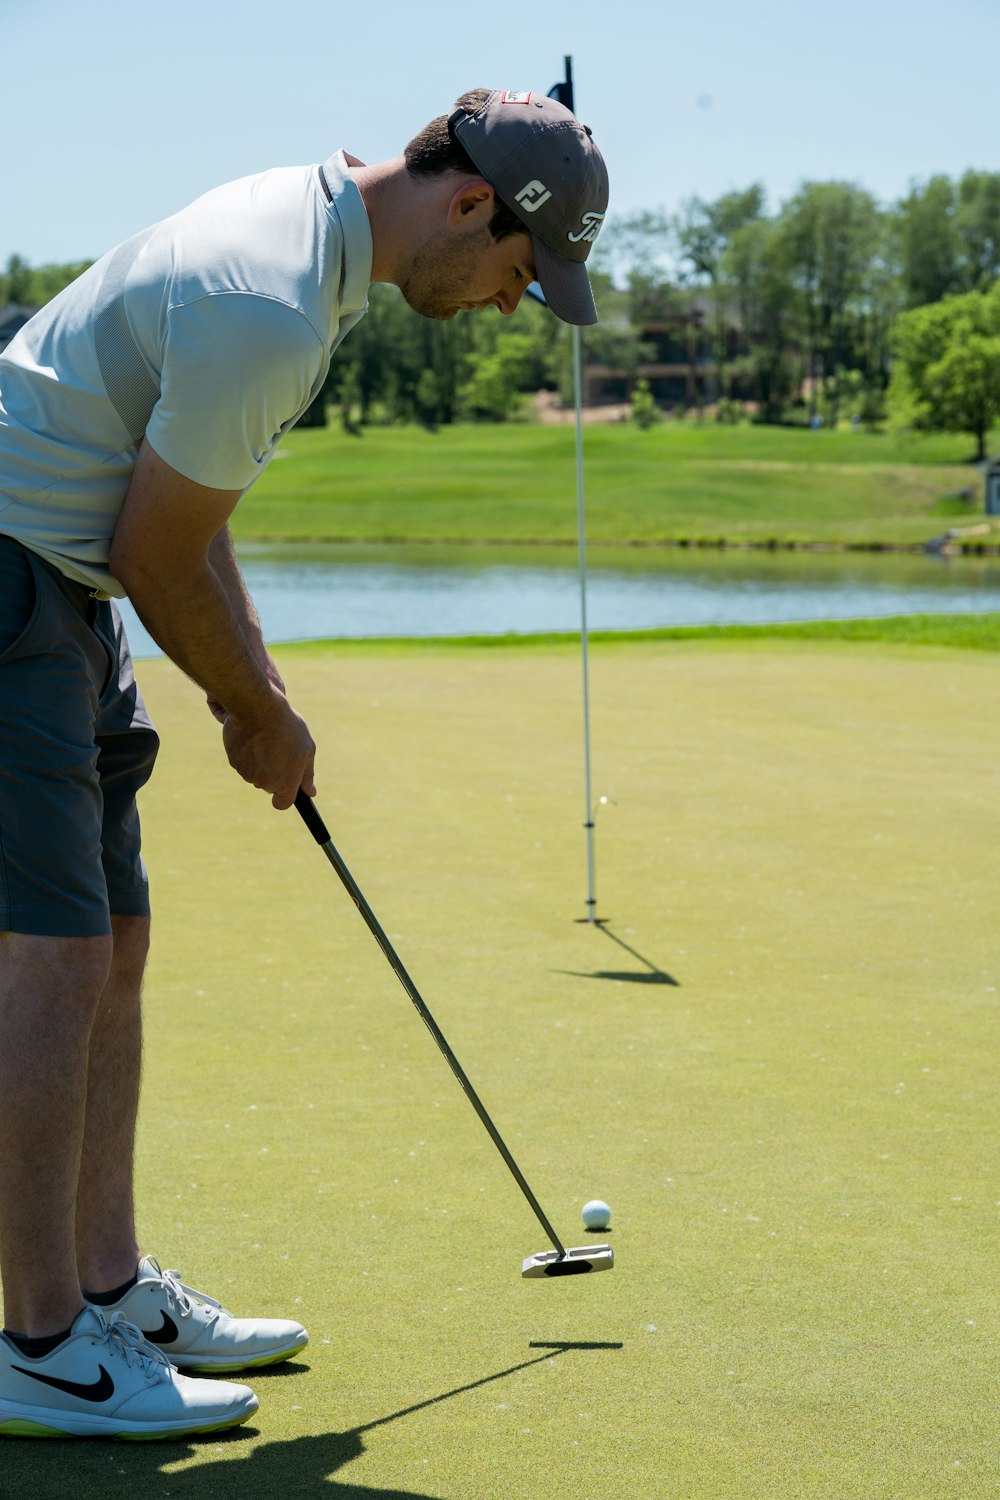 man in white t-shirt and brown shorts playing golf during daytime